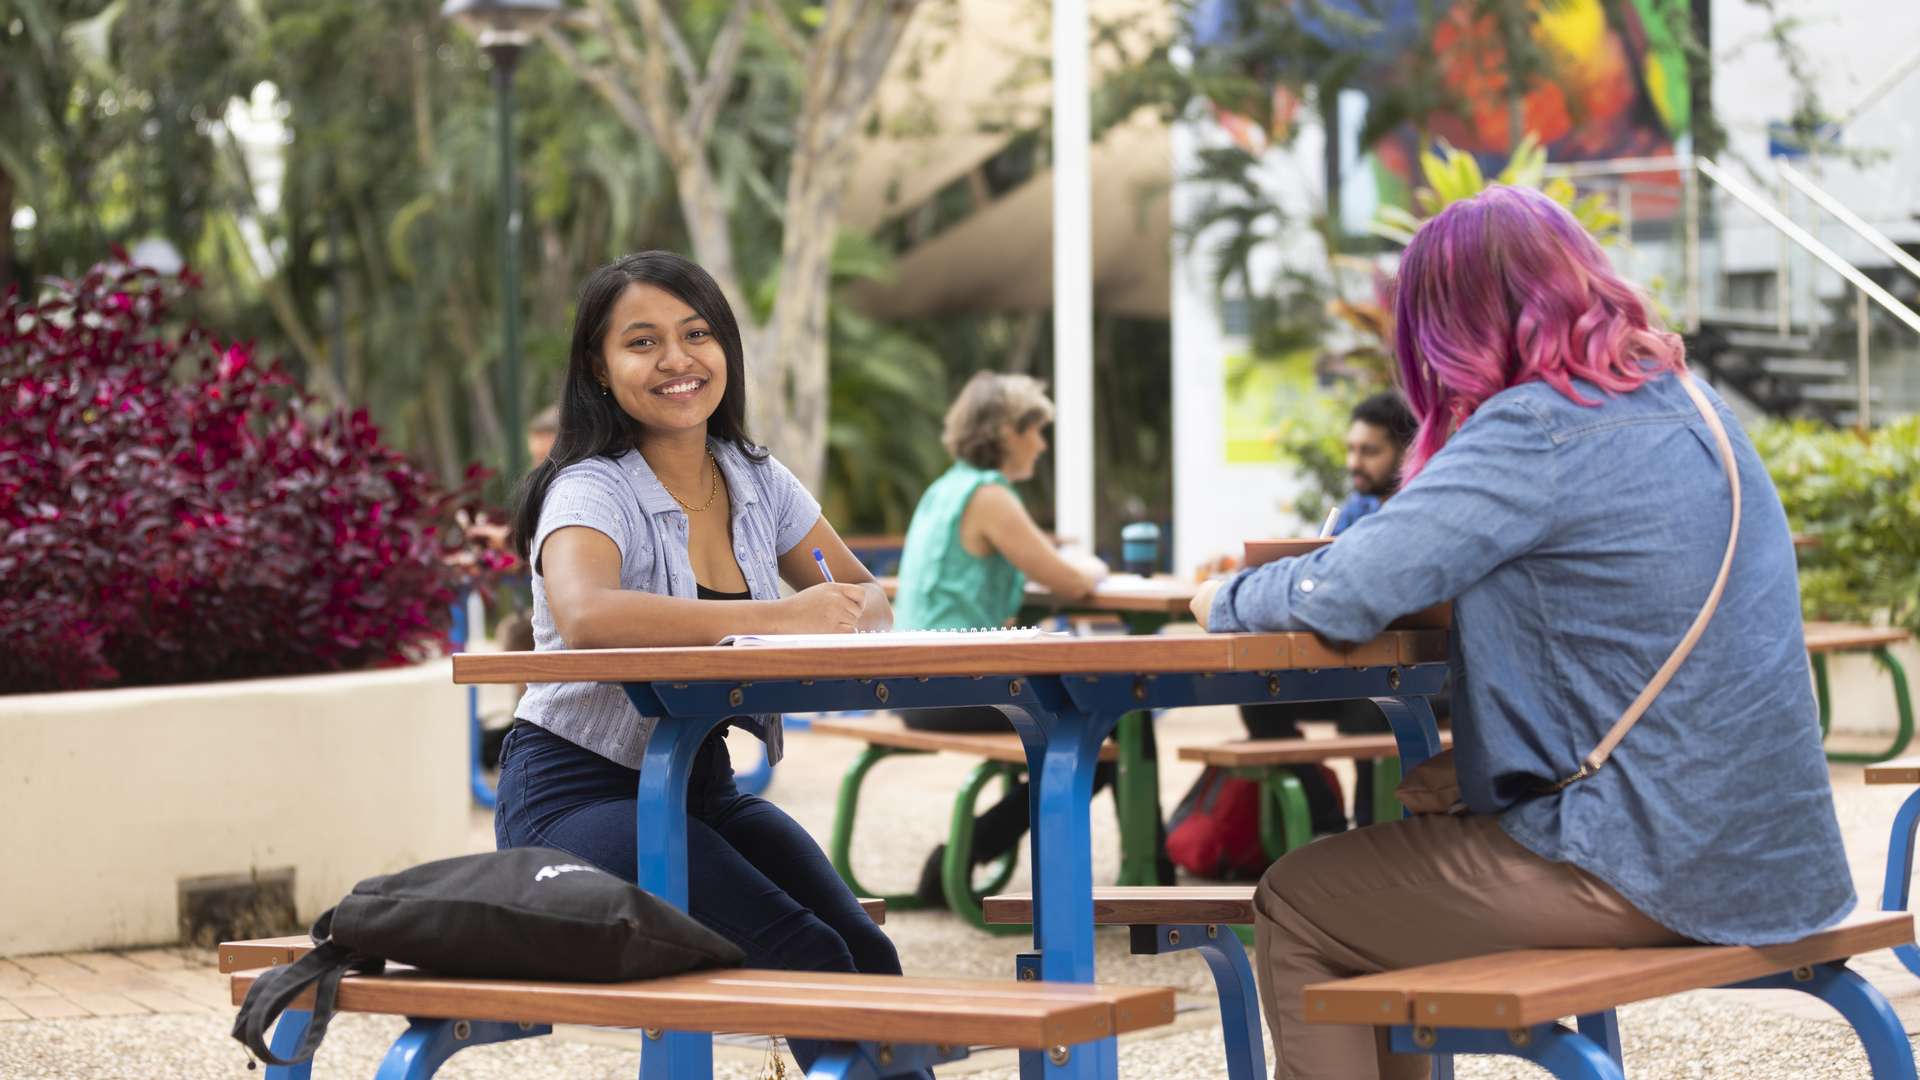 Smiling student studying at outdoor table with another student during the day.